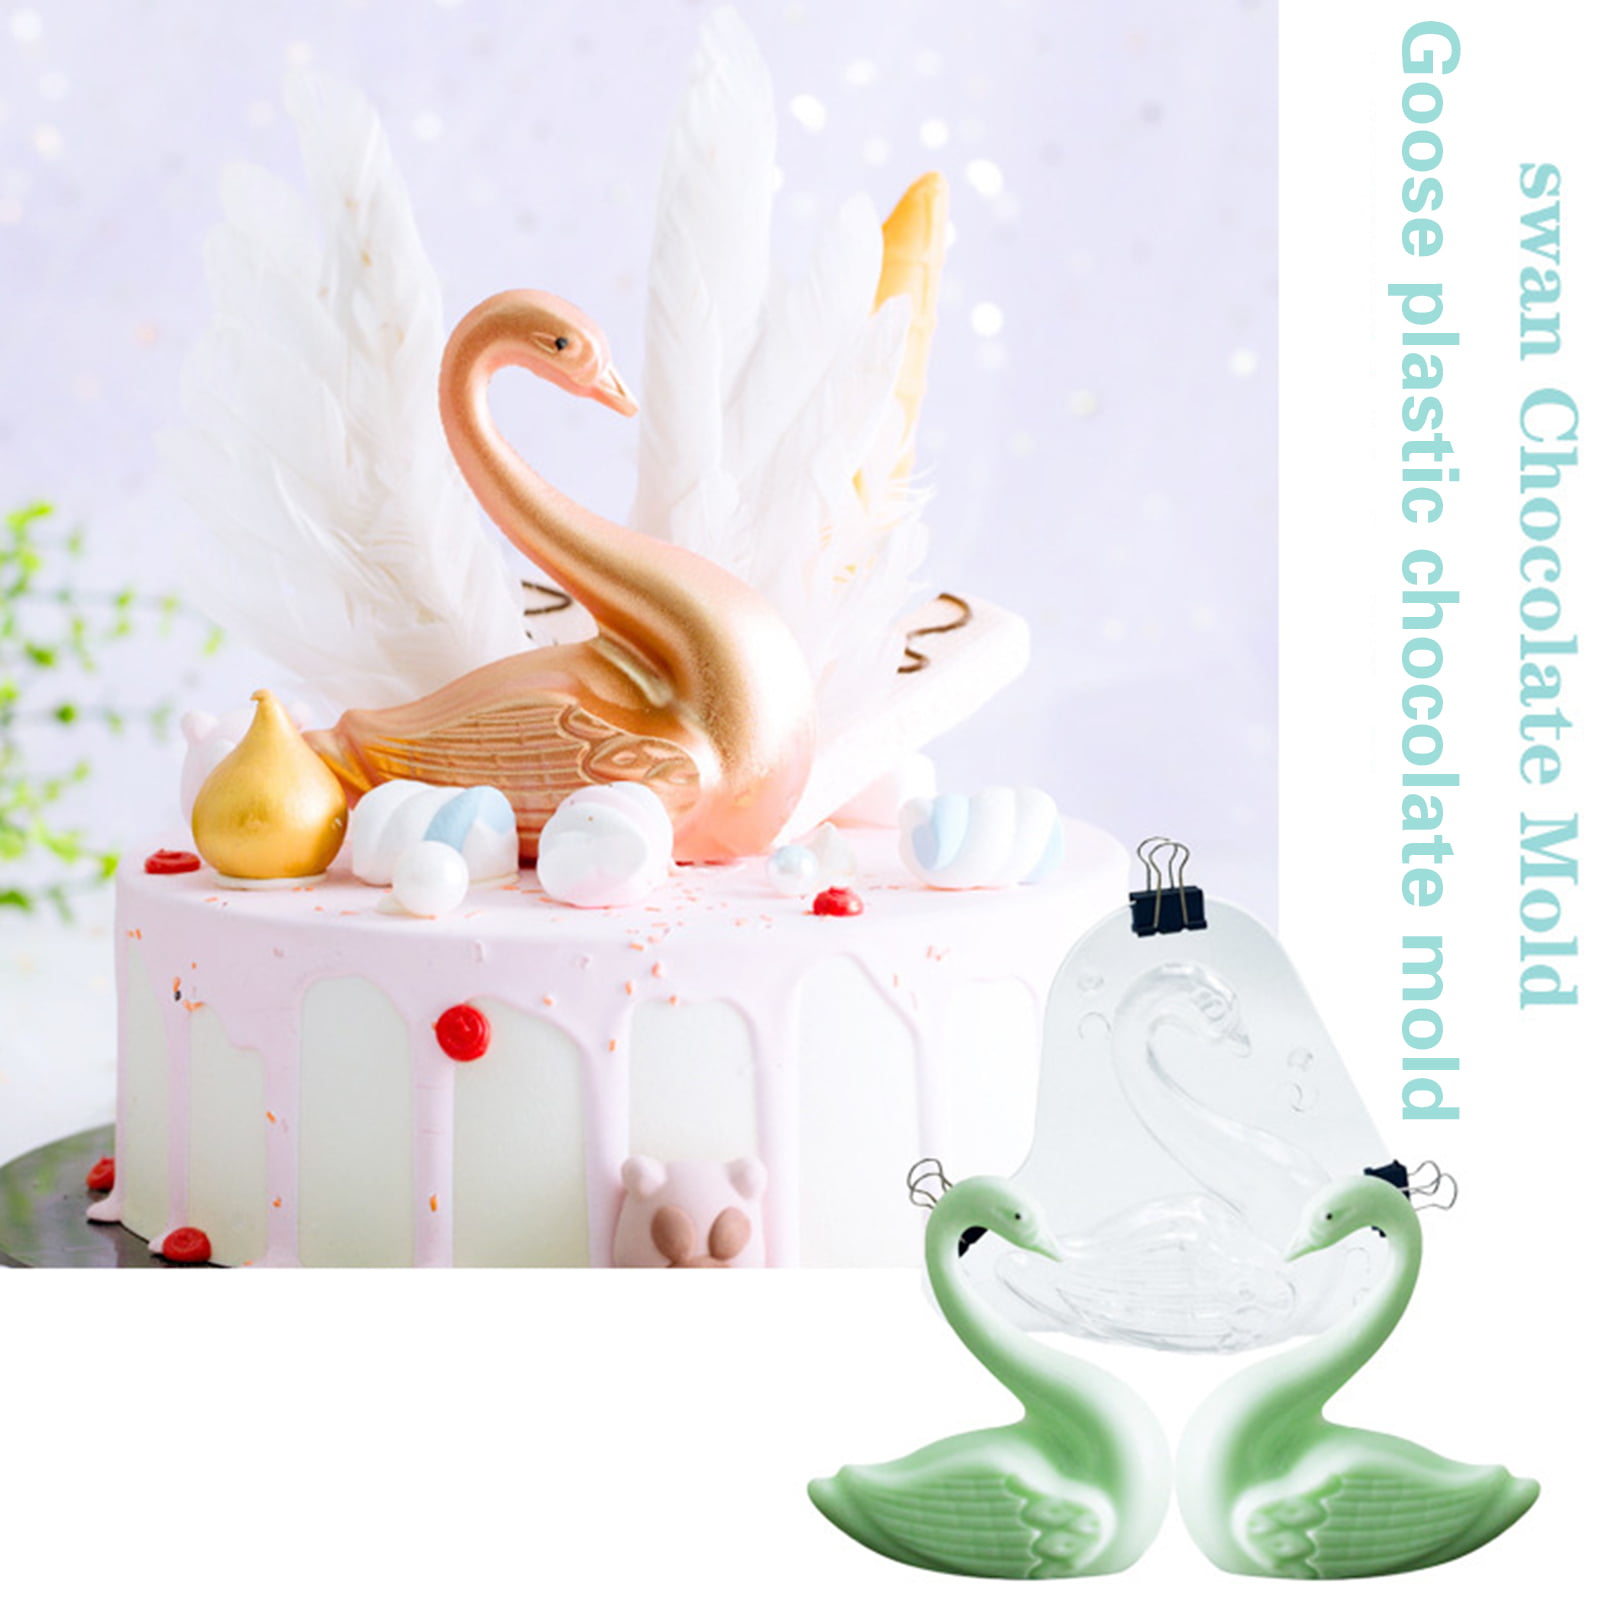 Birds Swan Silicone Cake Fondant Cookies Biscuit Chocolate Mold Decorate Tools 